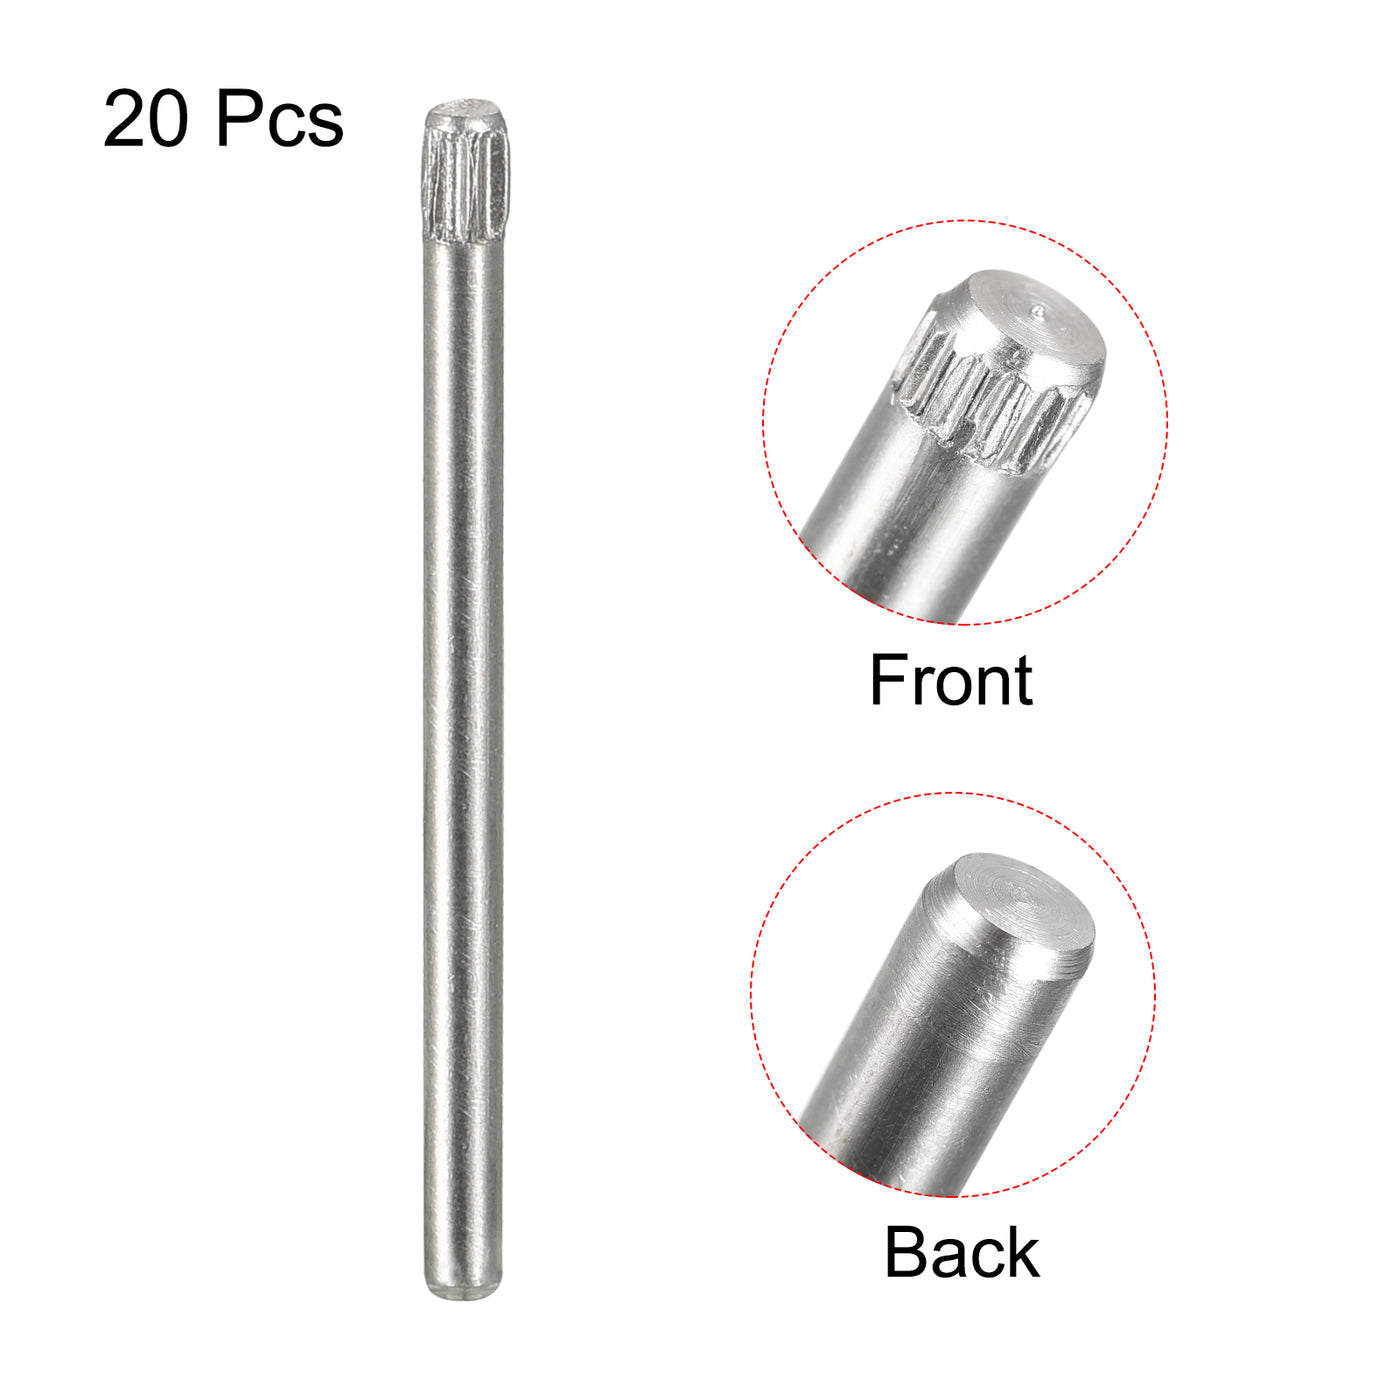 uxcell Uxcell 1.5x25mm 304 Stainless Steel Dowel Pins, 20Pcs Knurled Head Flat End Dowel Pin